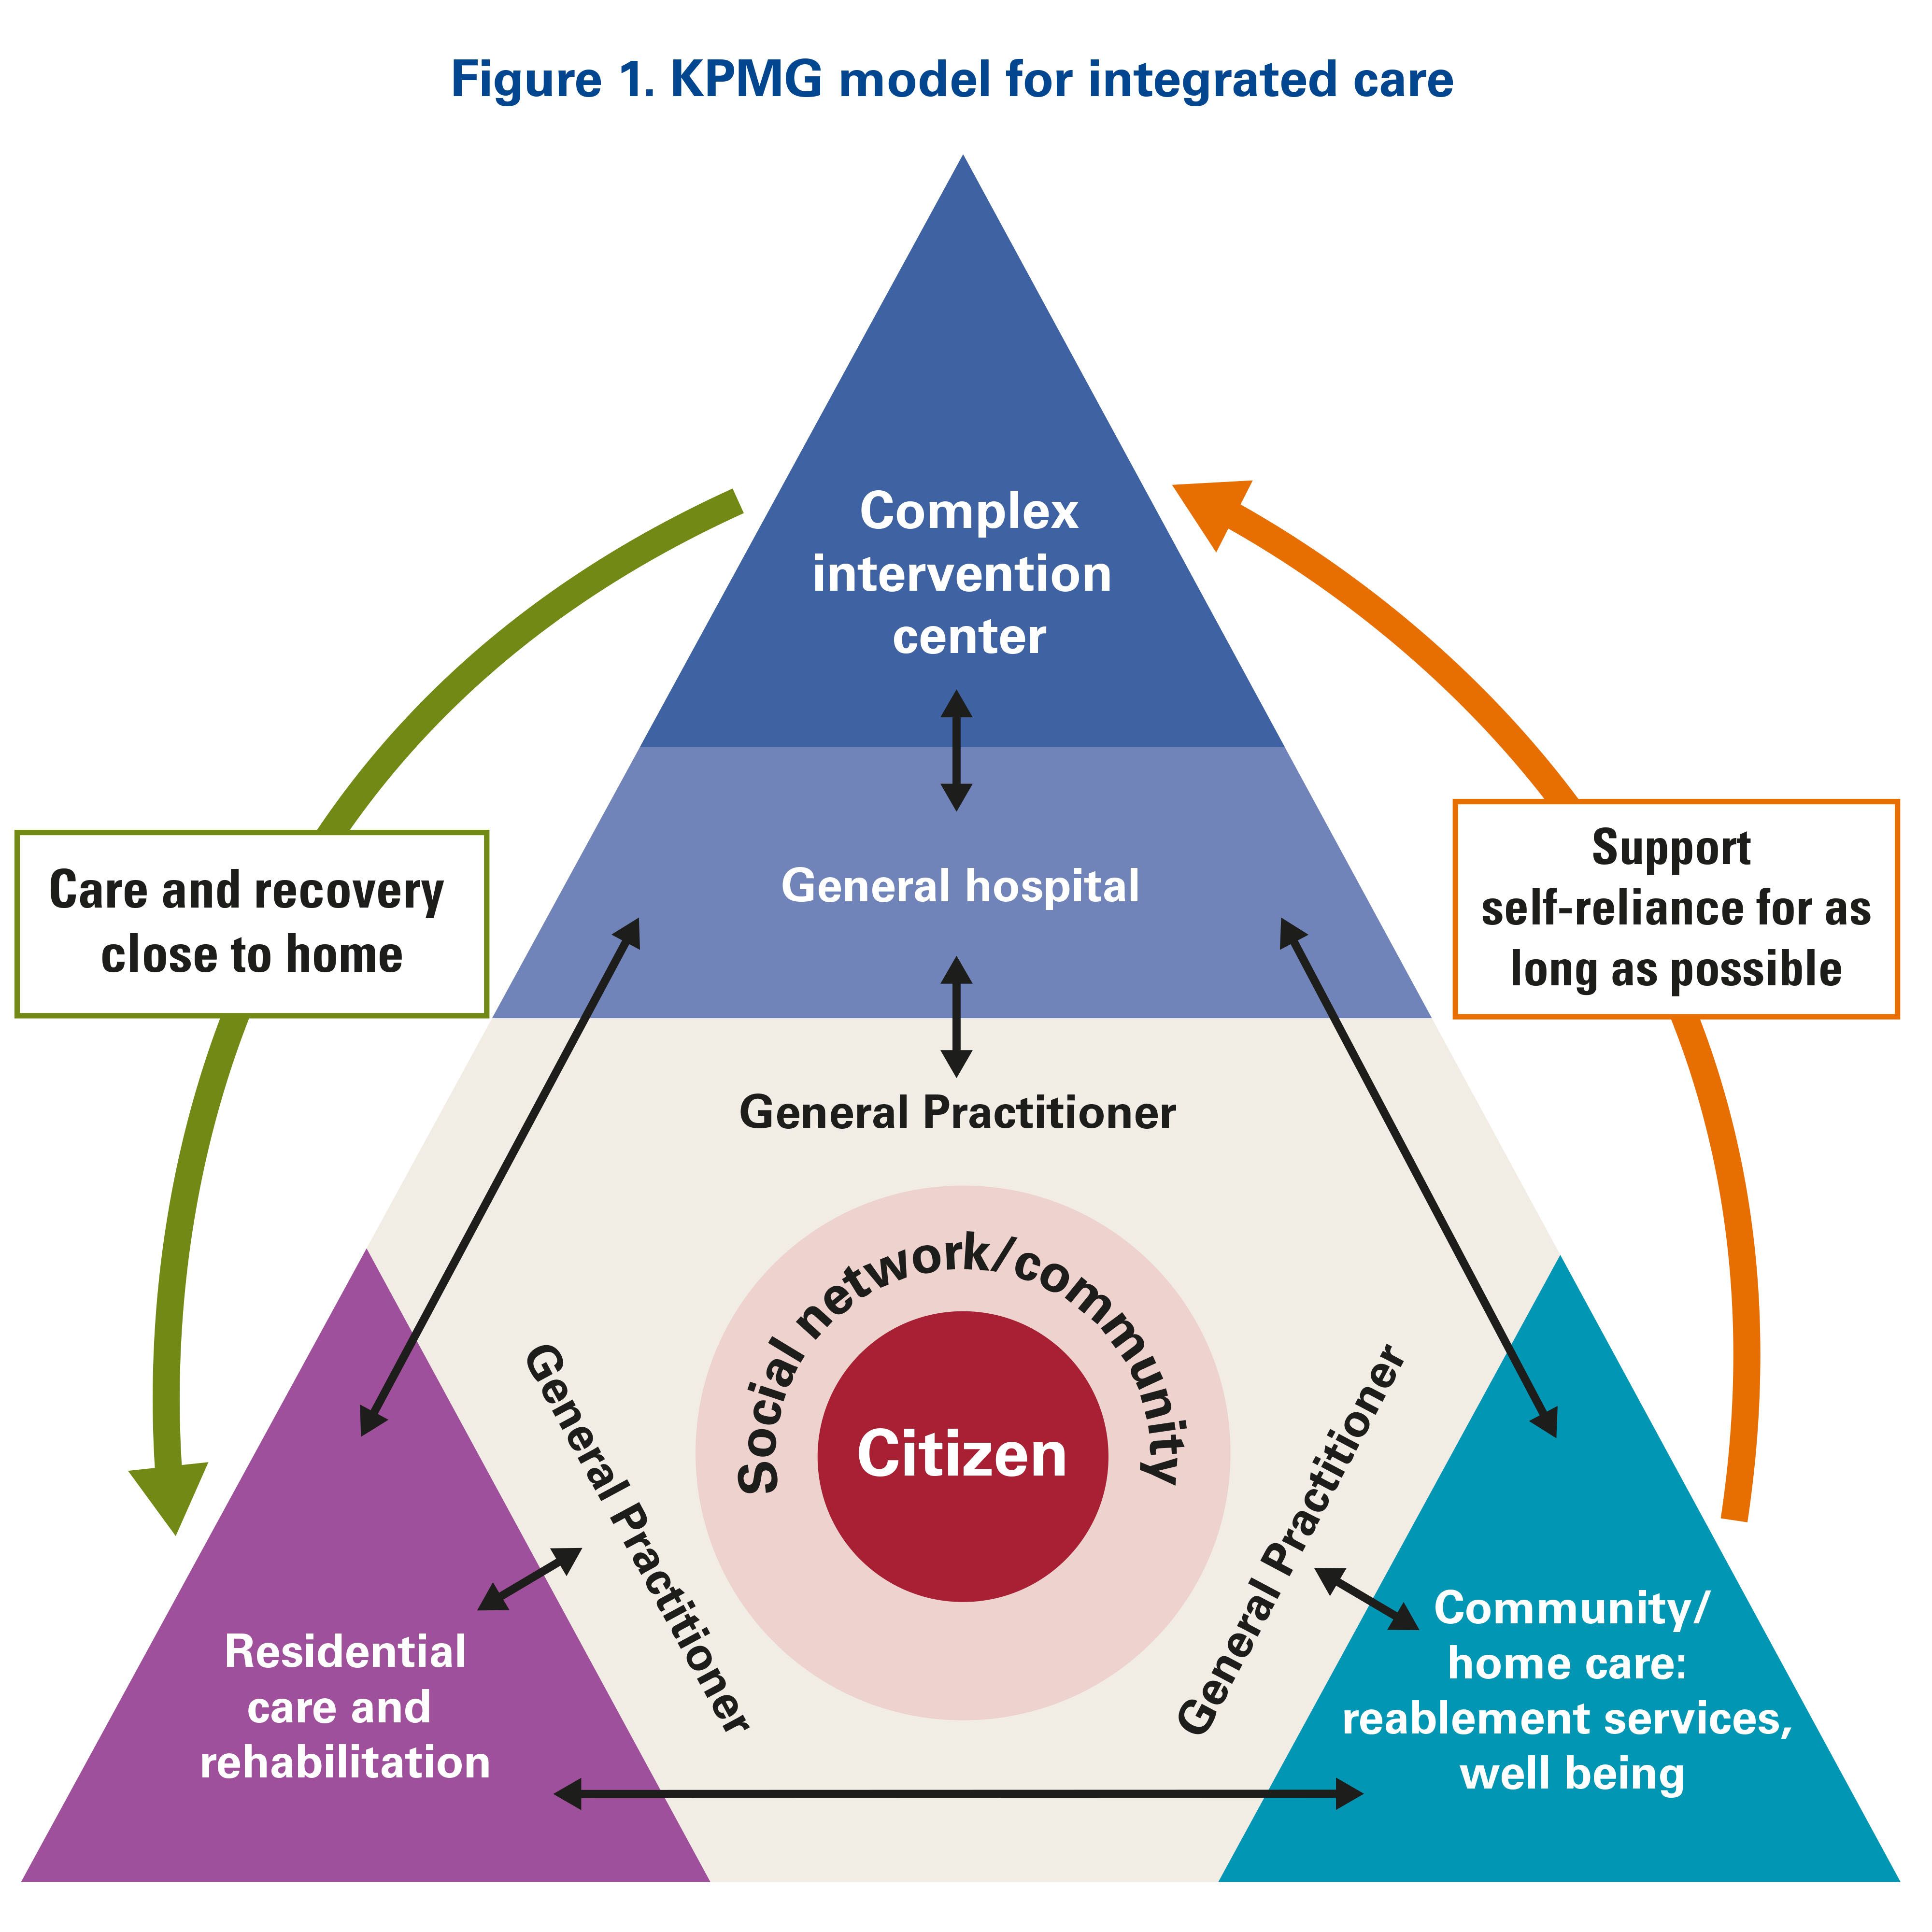 KPMG model for integrated care